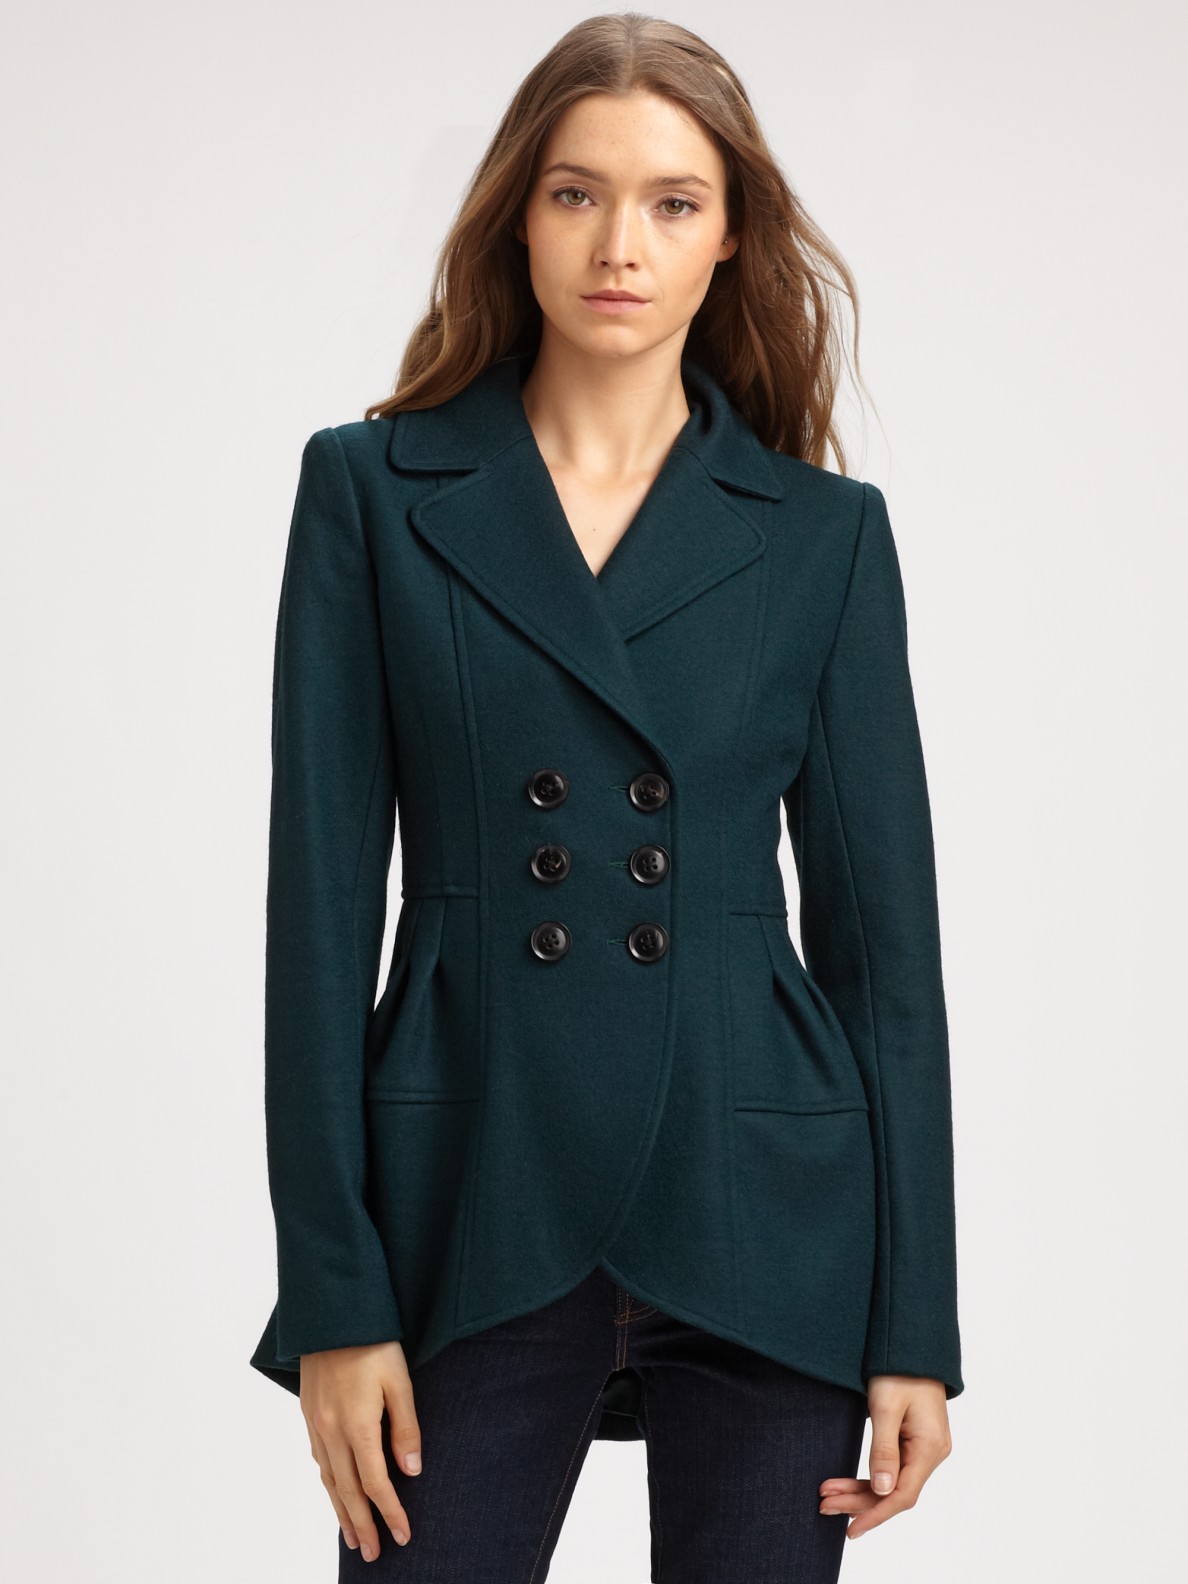 Nanette lepore Squire Lord Lady Jacket in Green | Lyst